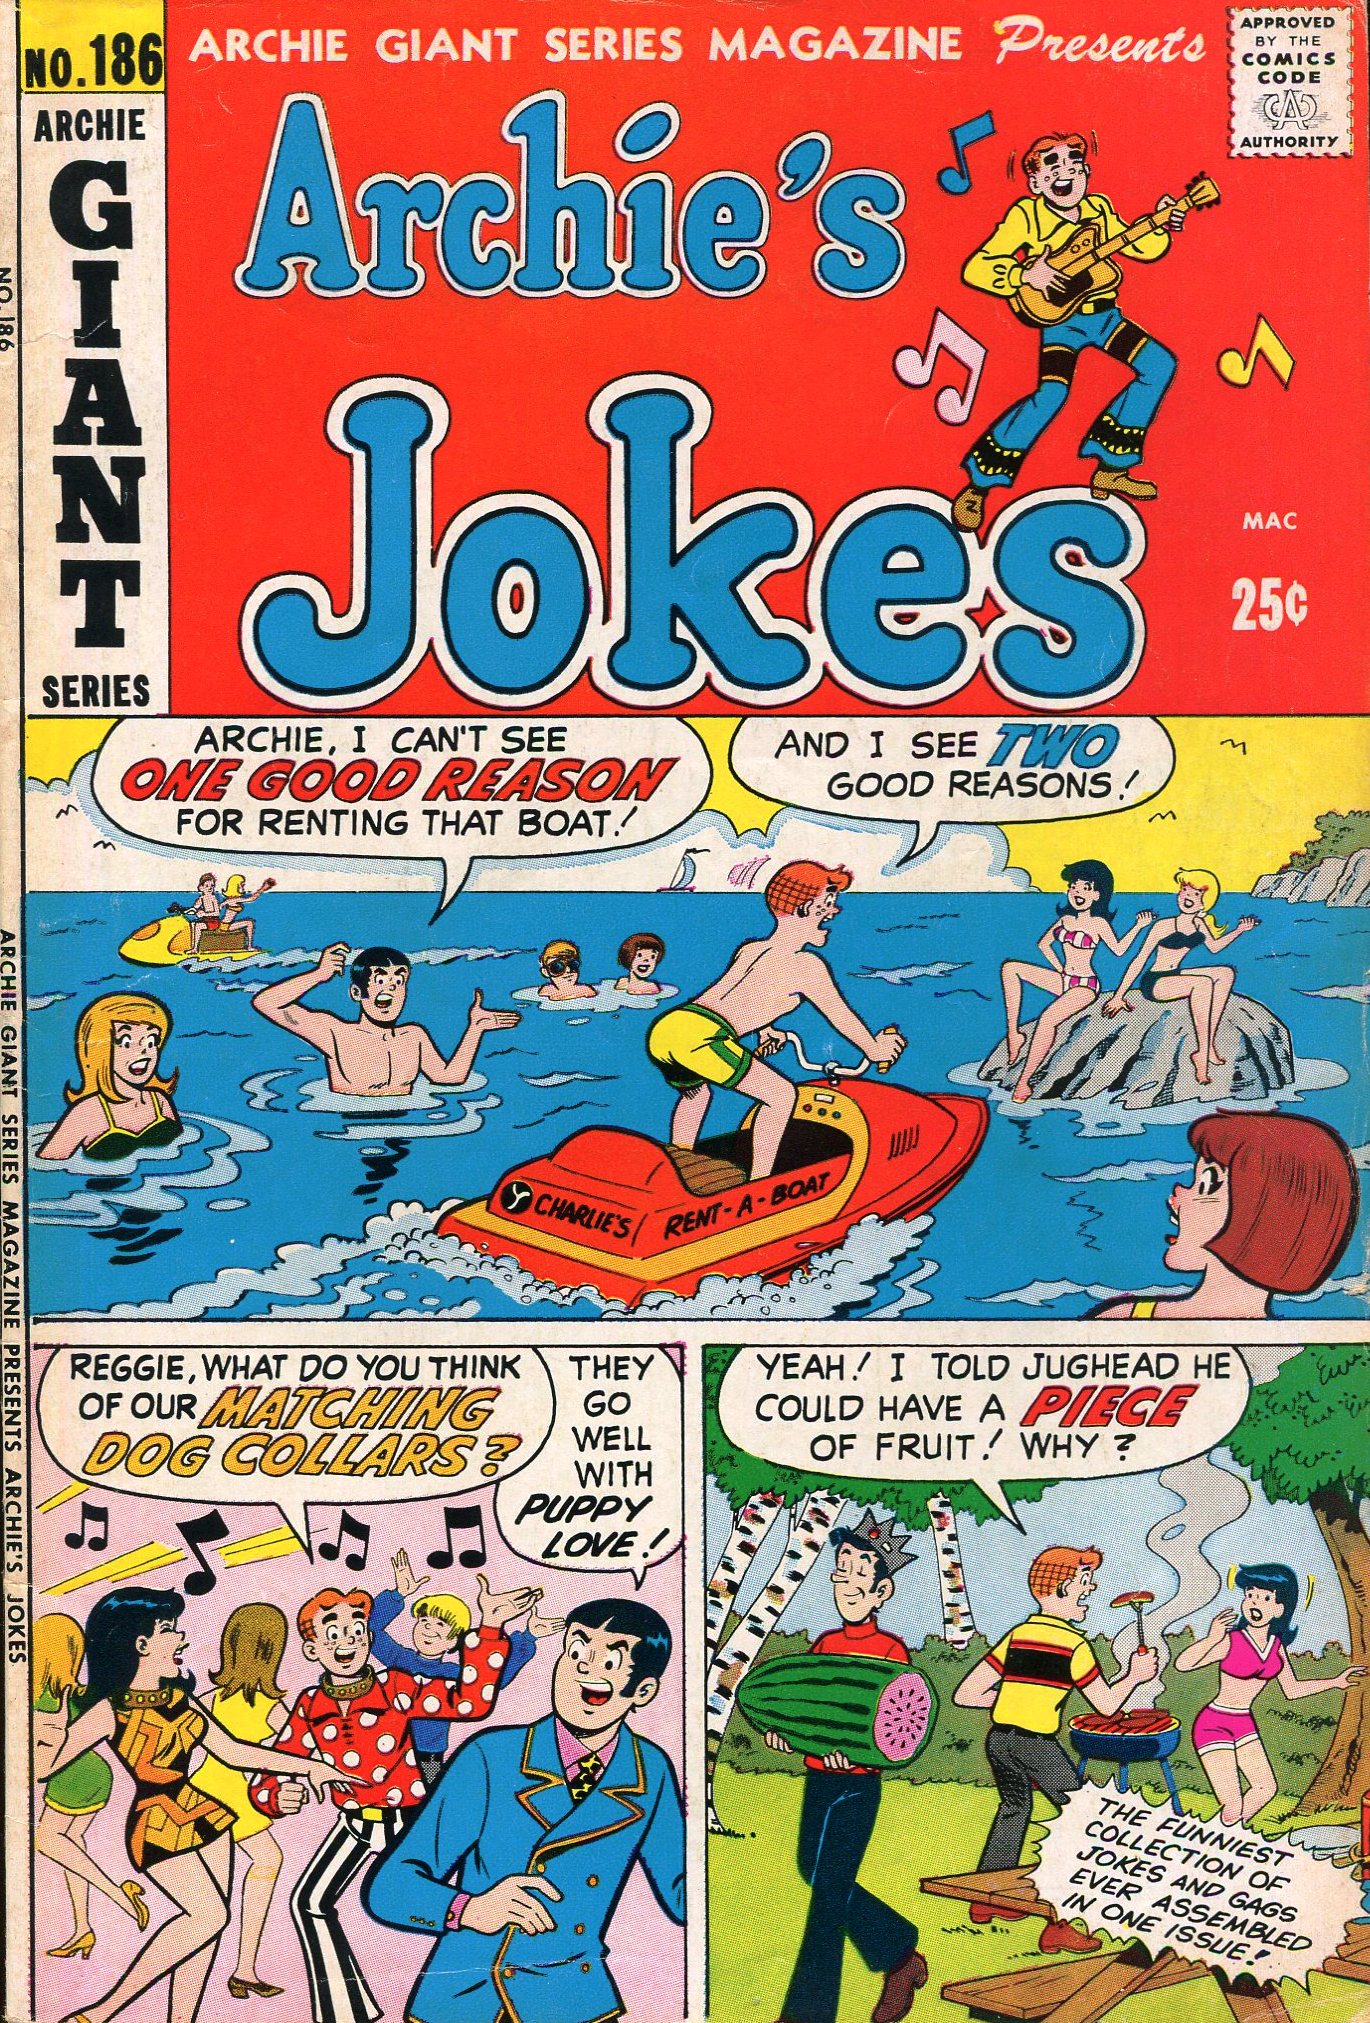 Read online Archie Giant Series Magazine comic -  Issue #186 - 1